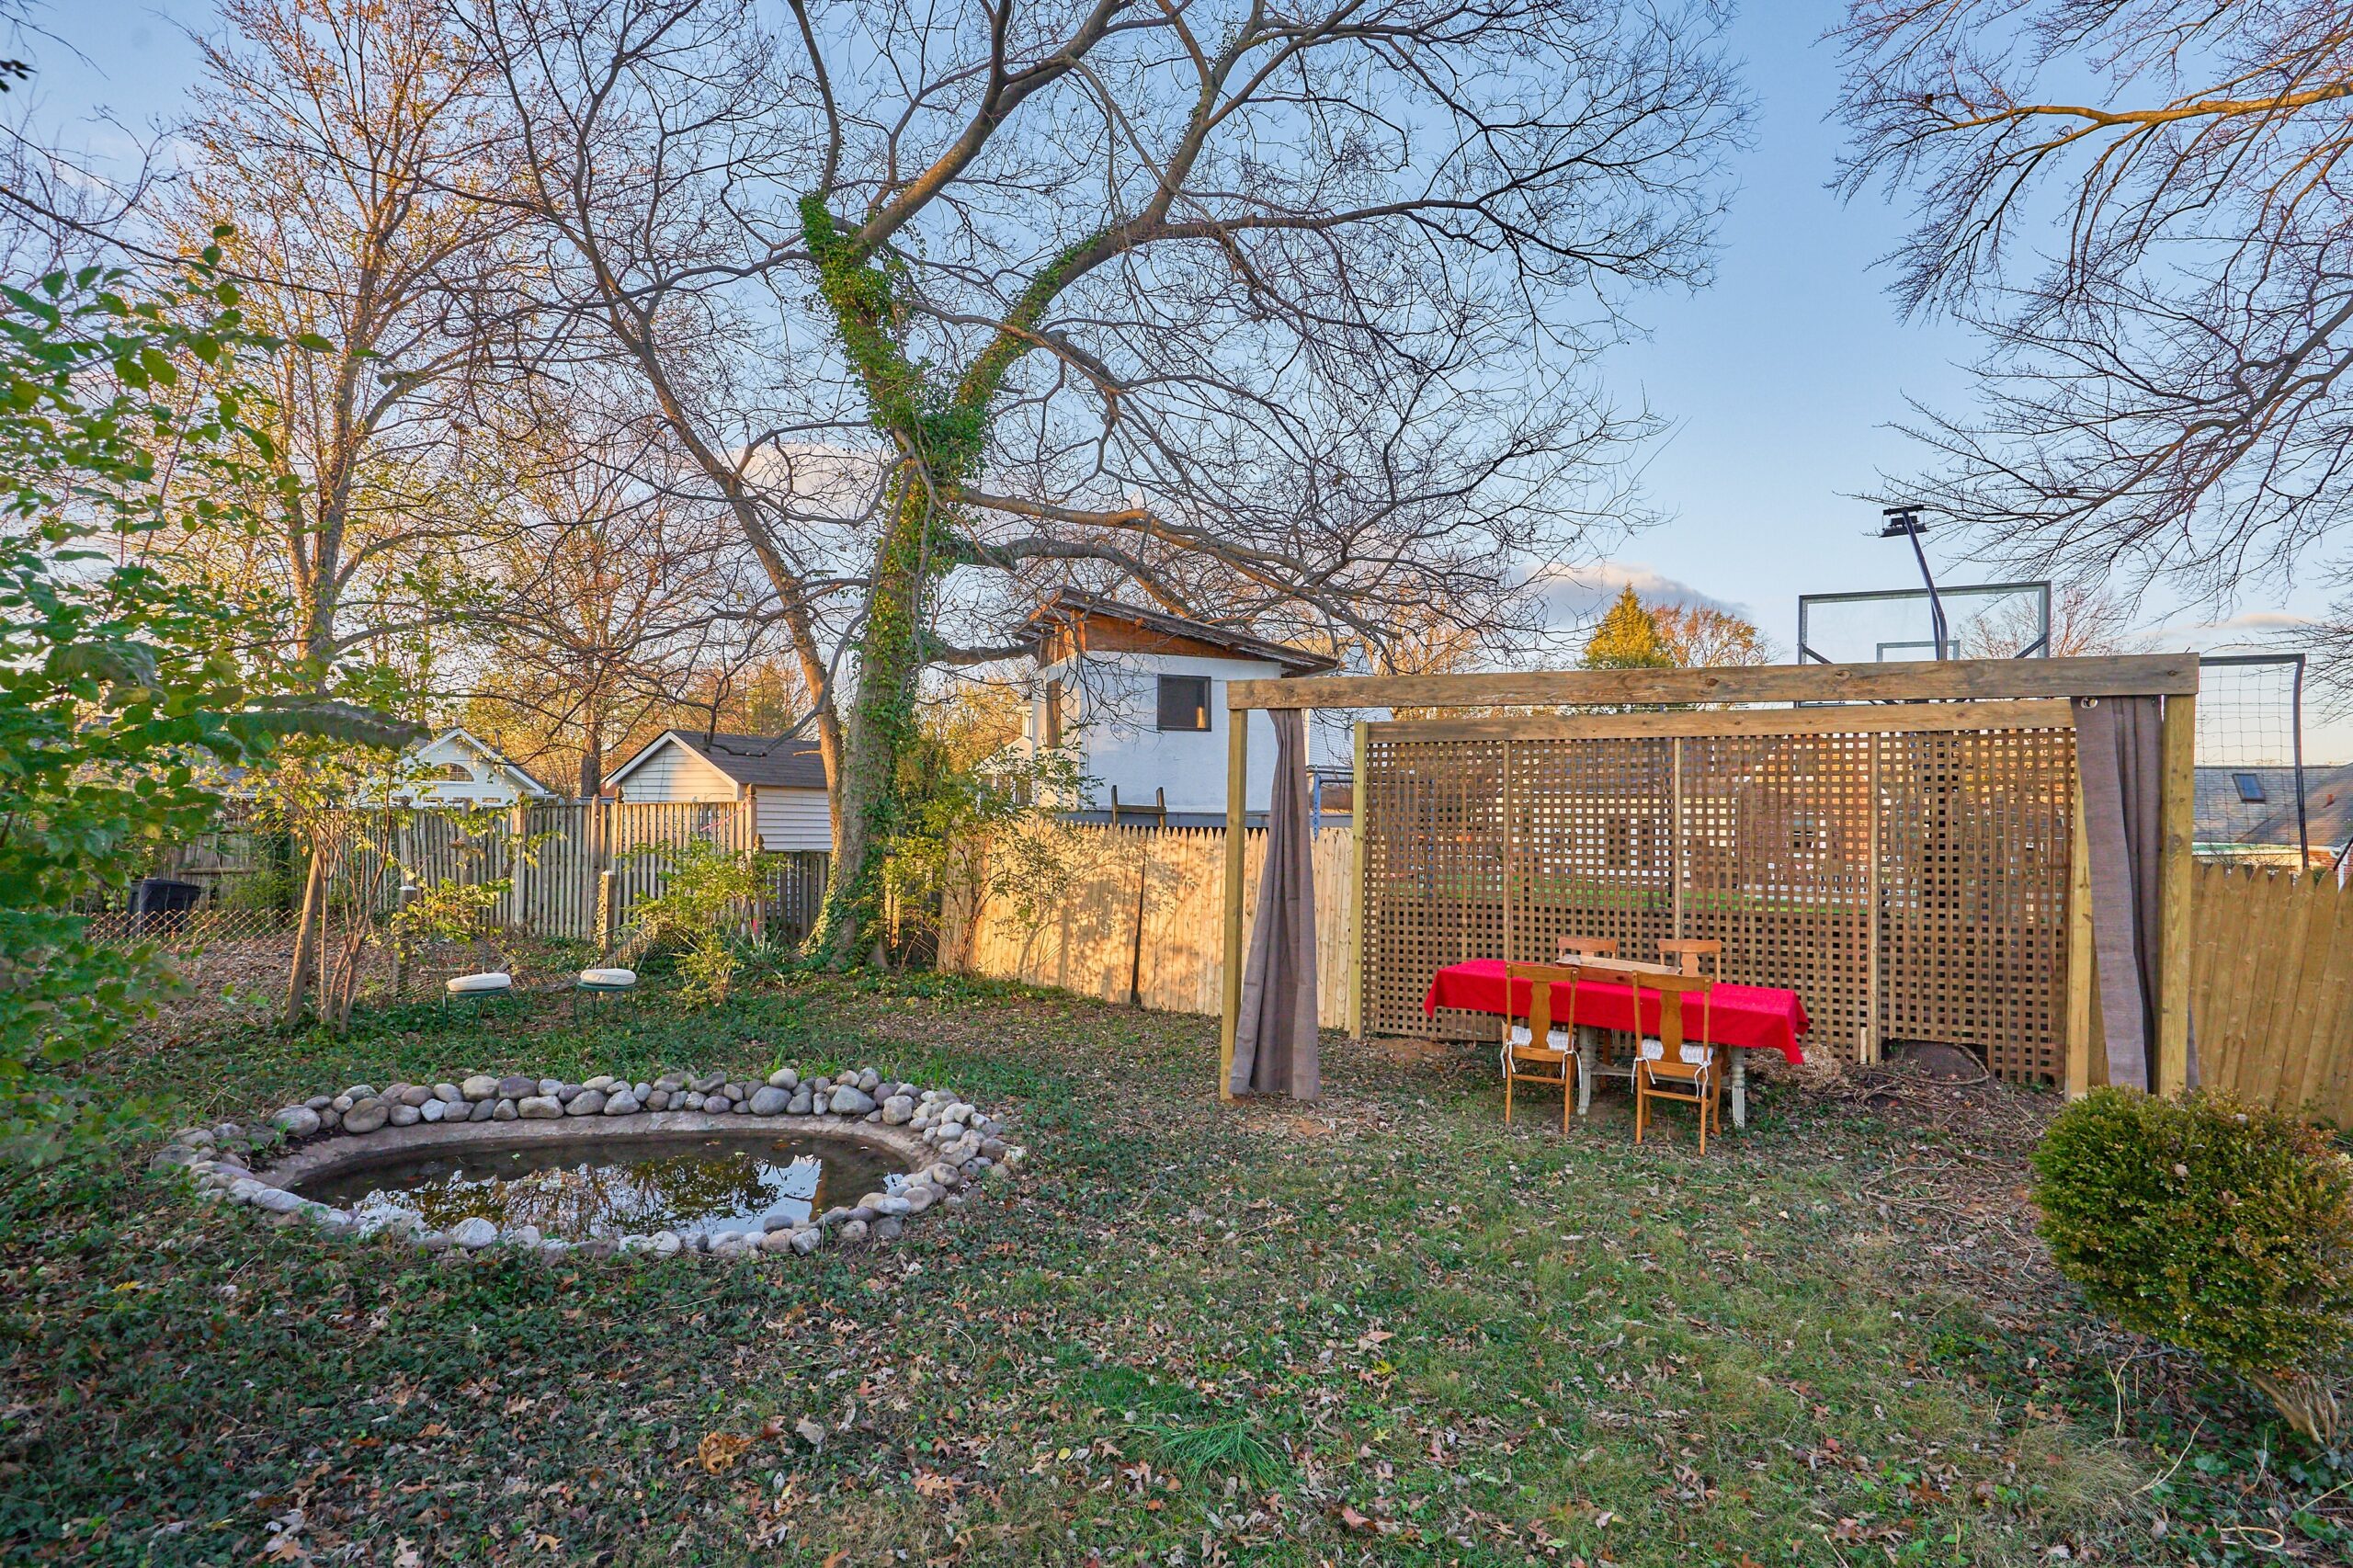 Professional exterior photo of 5933 16th St N, Arlington, VA - showing the back yard with a koi pond and an open-air shelter for a dining table with red tablecloth